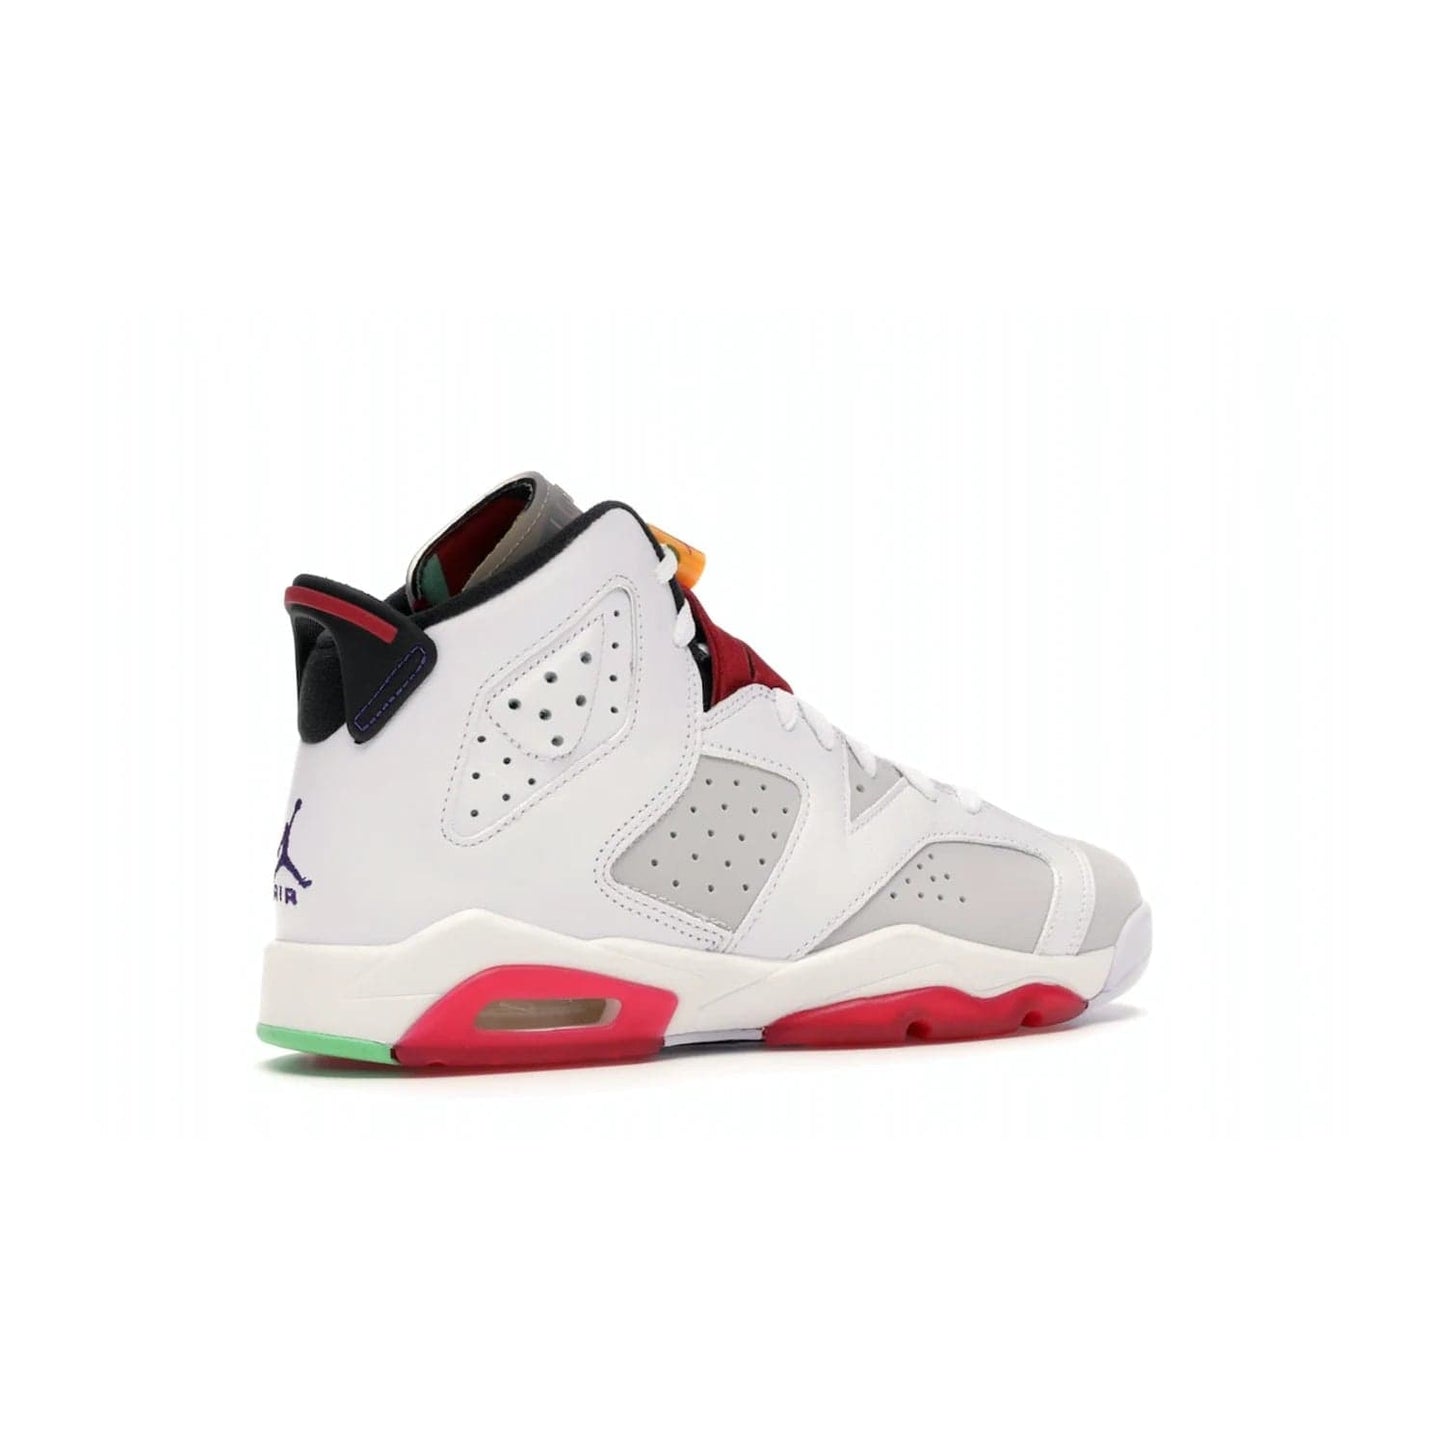 Jordan 6 Retro Hare (GS) - Image 34 - Only at www.BallersClubKickz.com - The Air Jordan 6 Hare GS. Comfortable suede upper, perforations, red pods, two-tone midsole, and signature "Jumpman" emblem. Released 17 June 2020. Perfect for any sneakerhead.